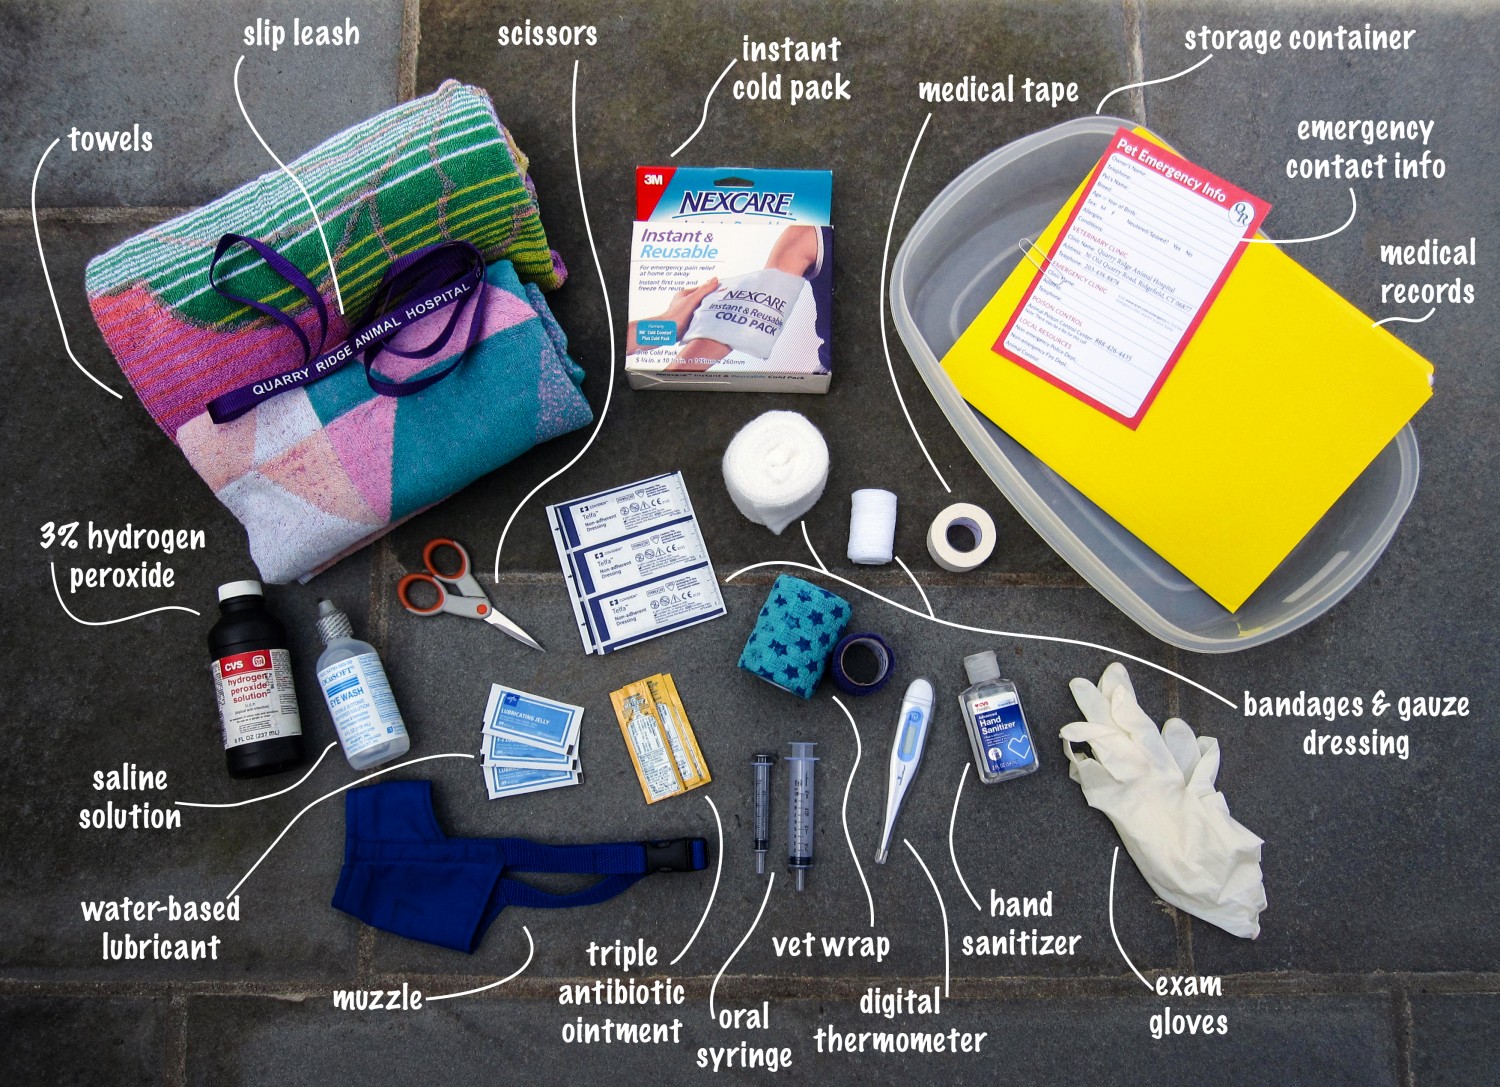 Here's a look inside our pet first aid kit